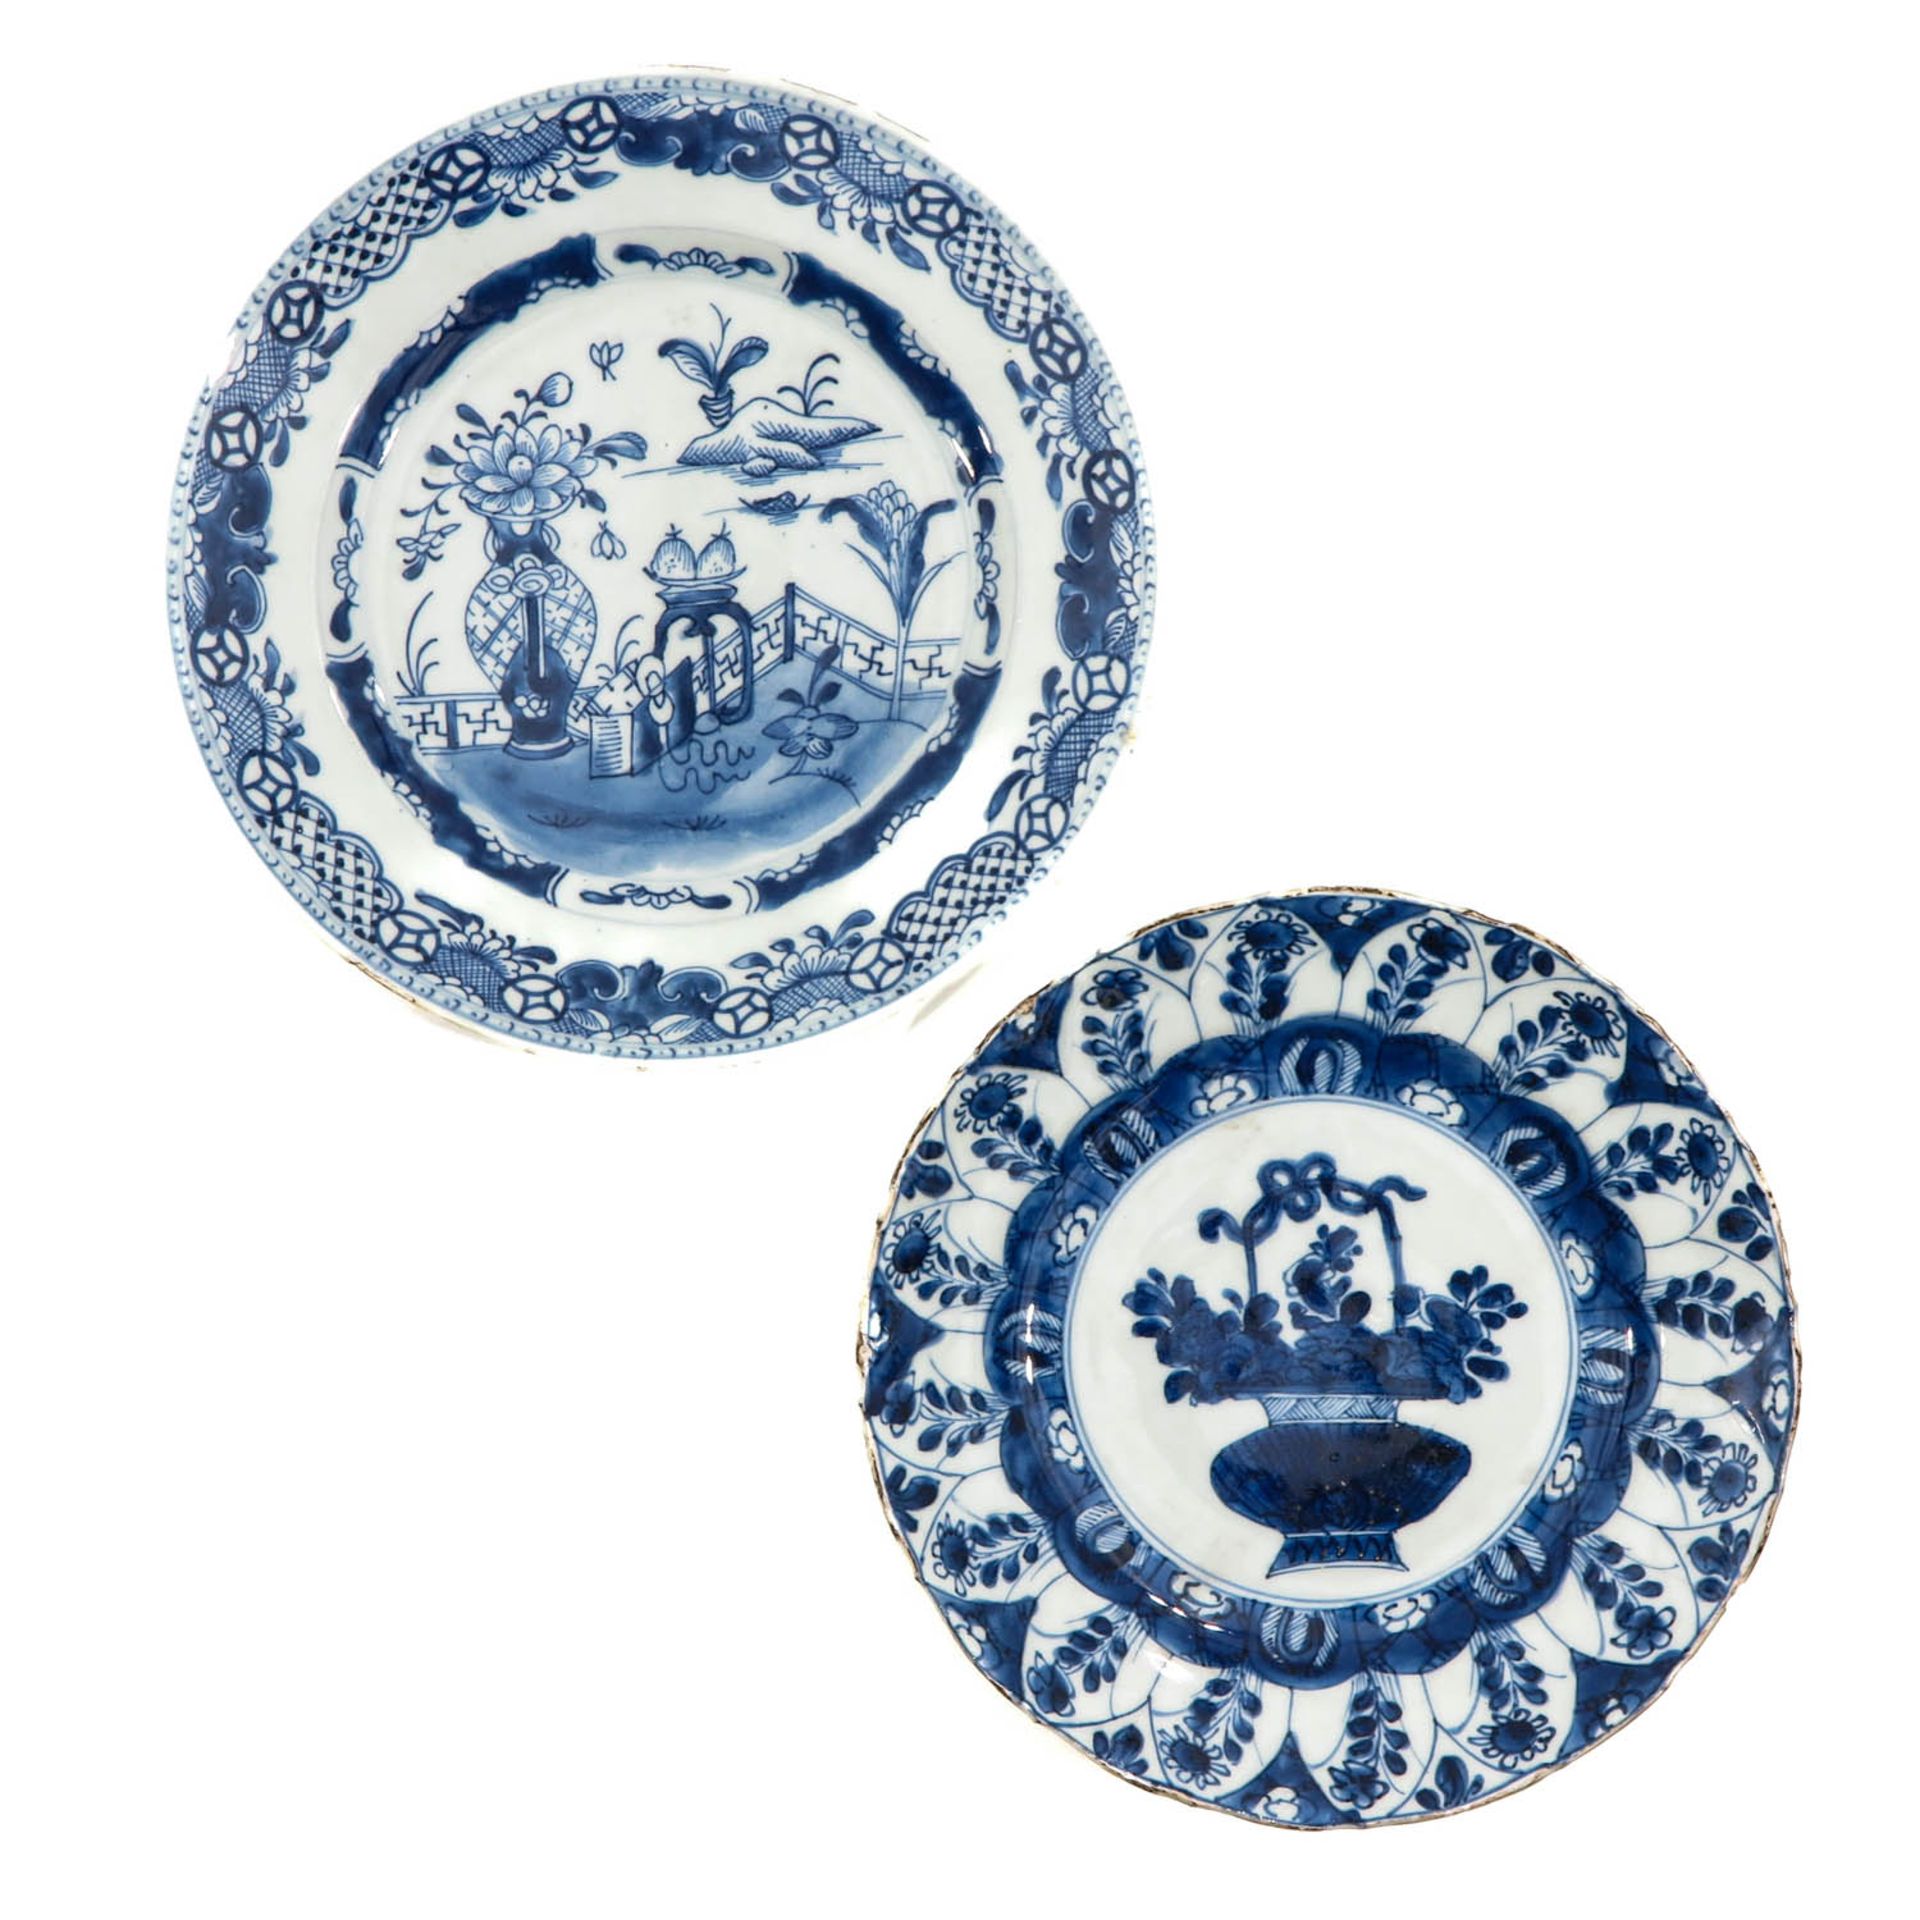 A Collection of 5 Blue and White Plates - Image 5 of 9